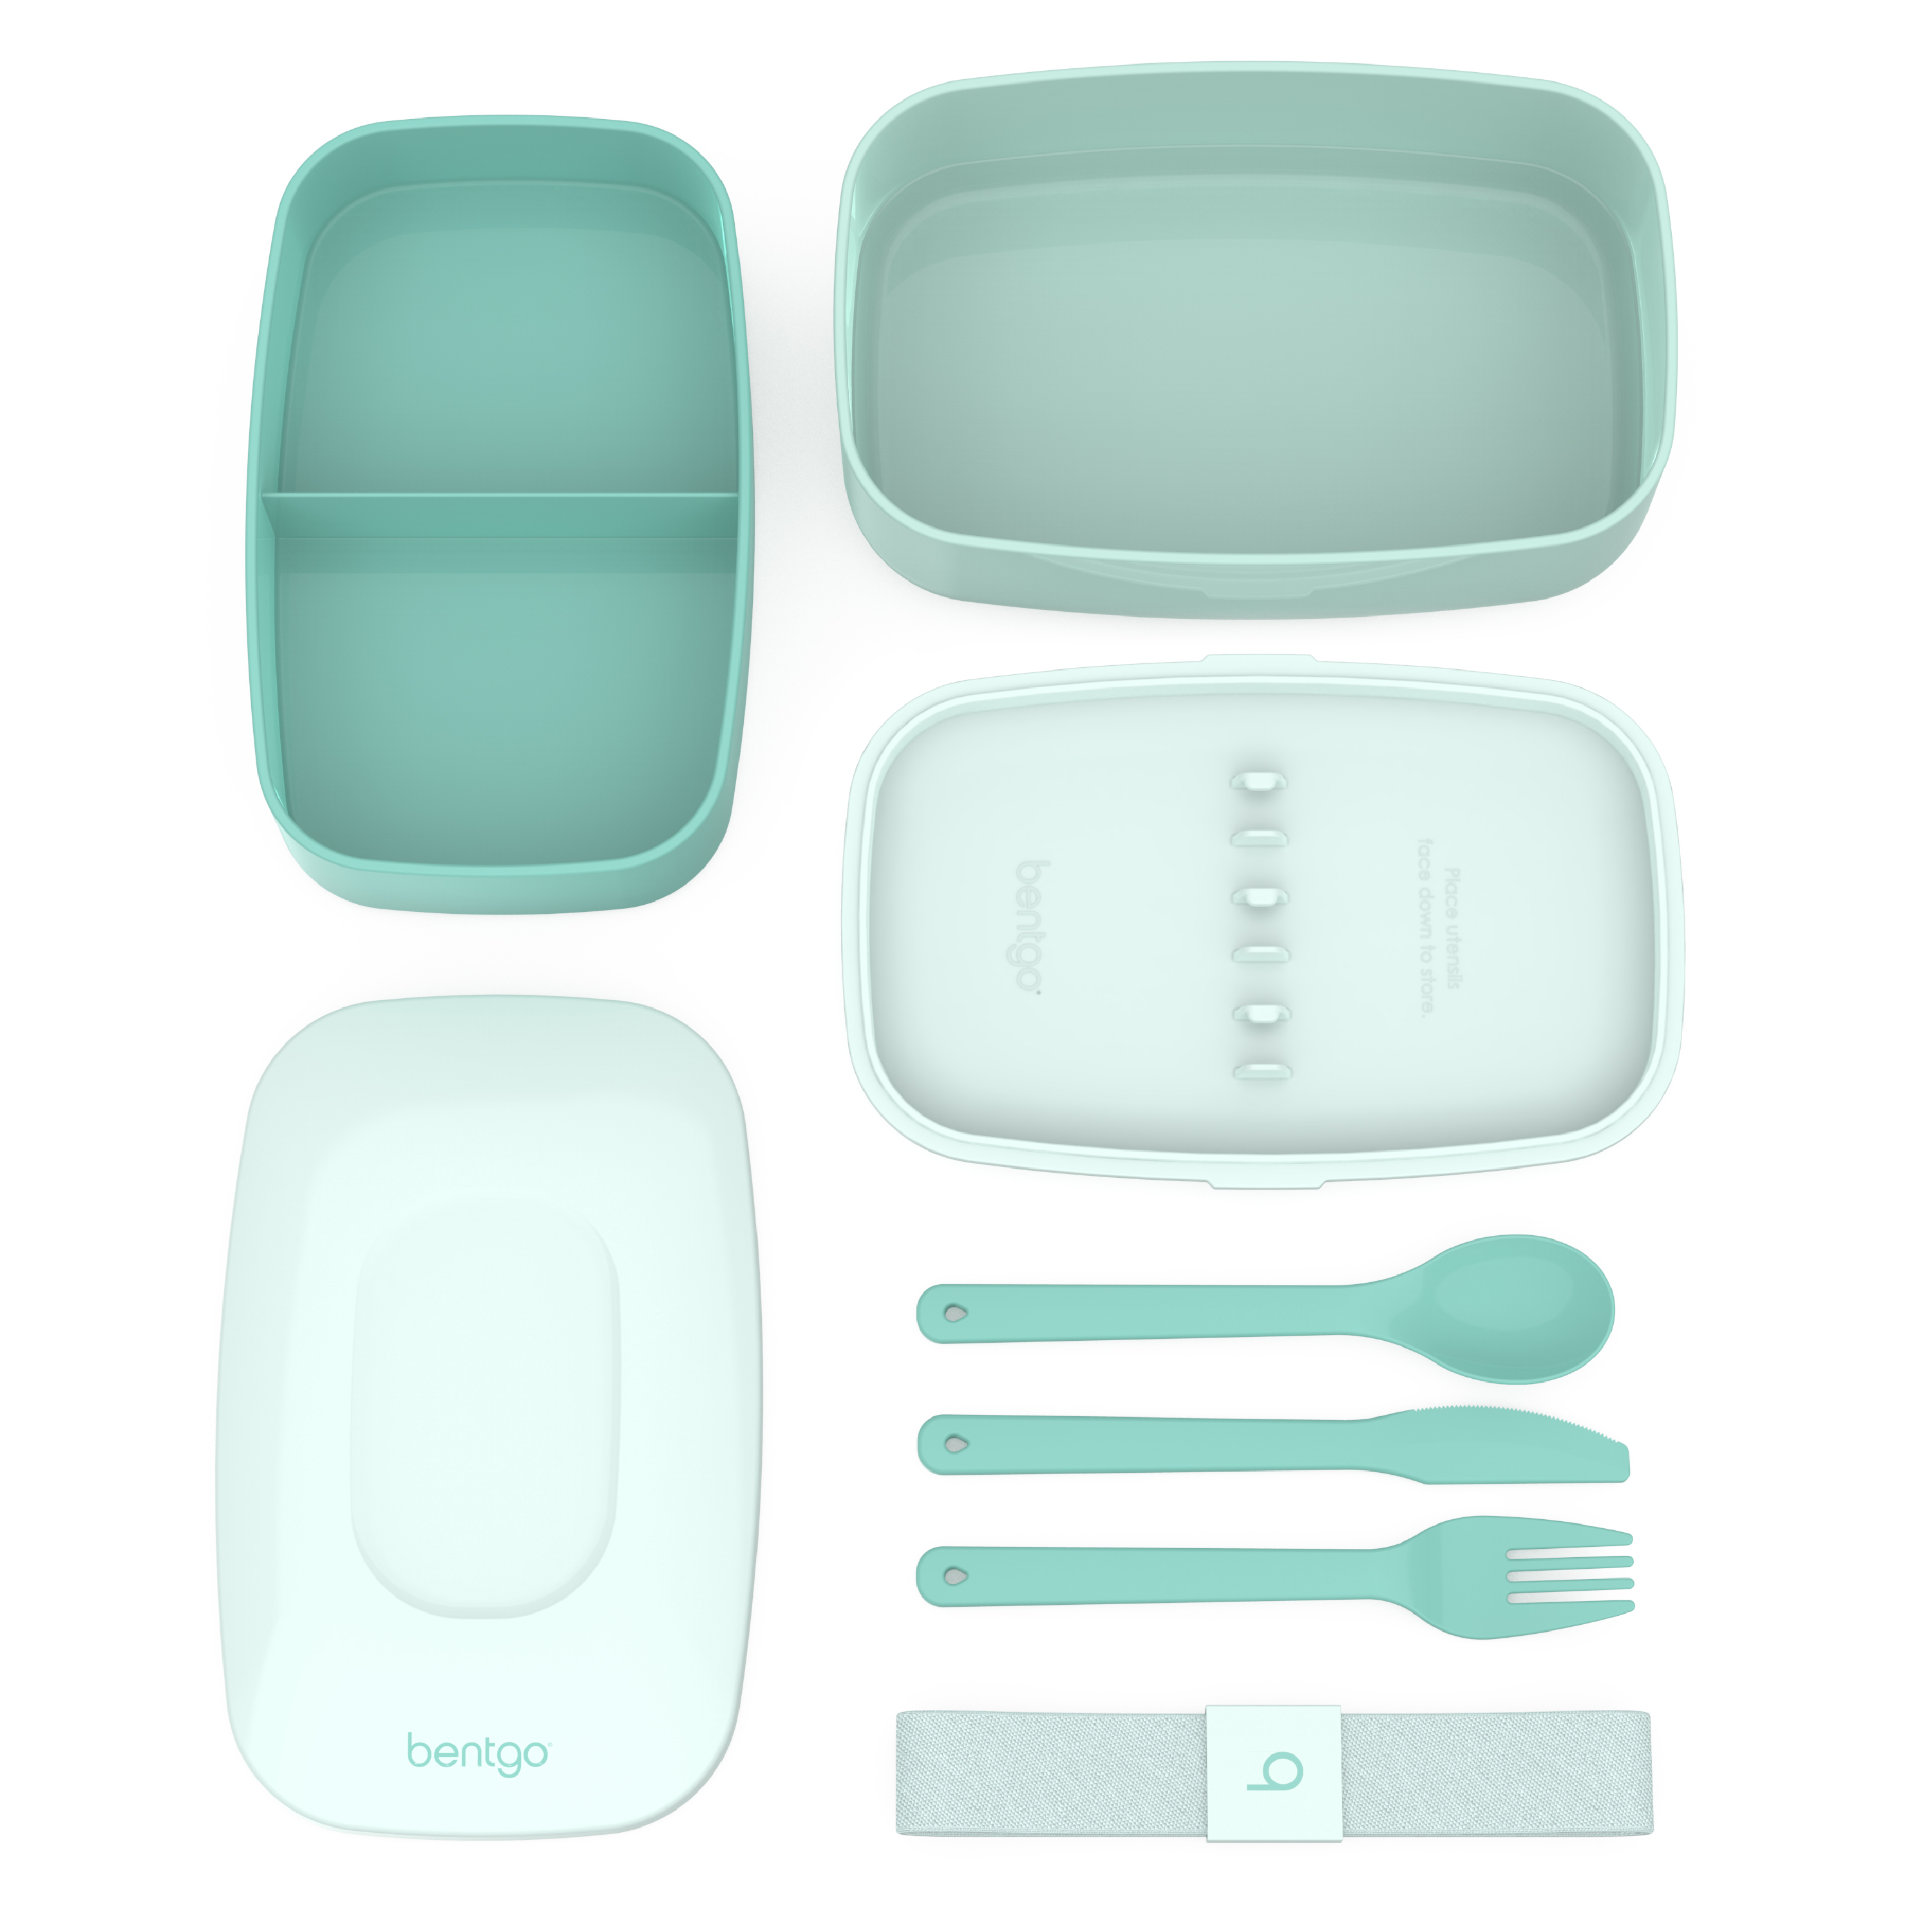 Bentgo Classic - All-in-One Stackable Bento Lunch Box Container - Modern Bento-Style Design Includes 2 Stackable Containers, Built-in Plastic Utensil Set, and Nylon Sealing Strap (Coastal Aqua) - image 4 of 5